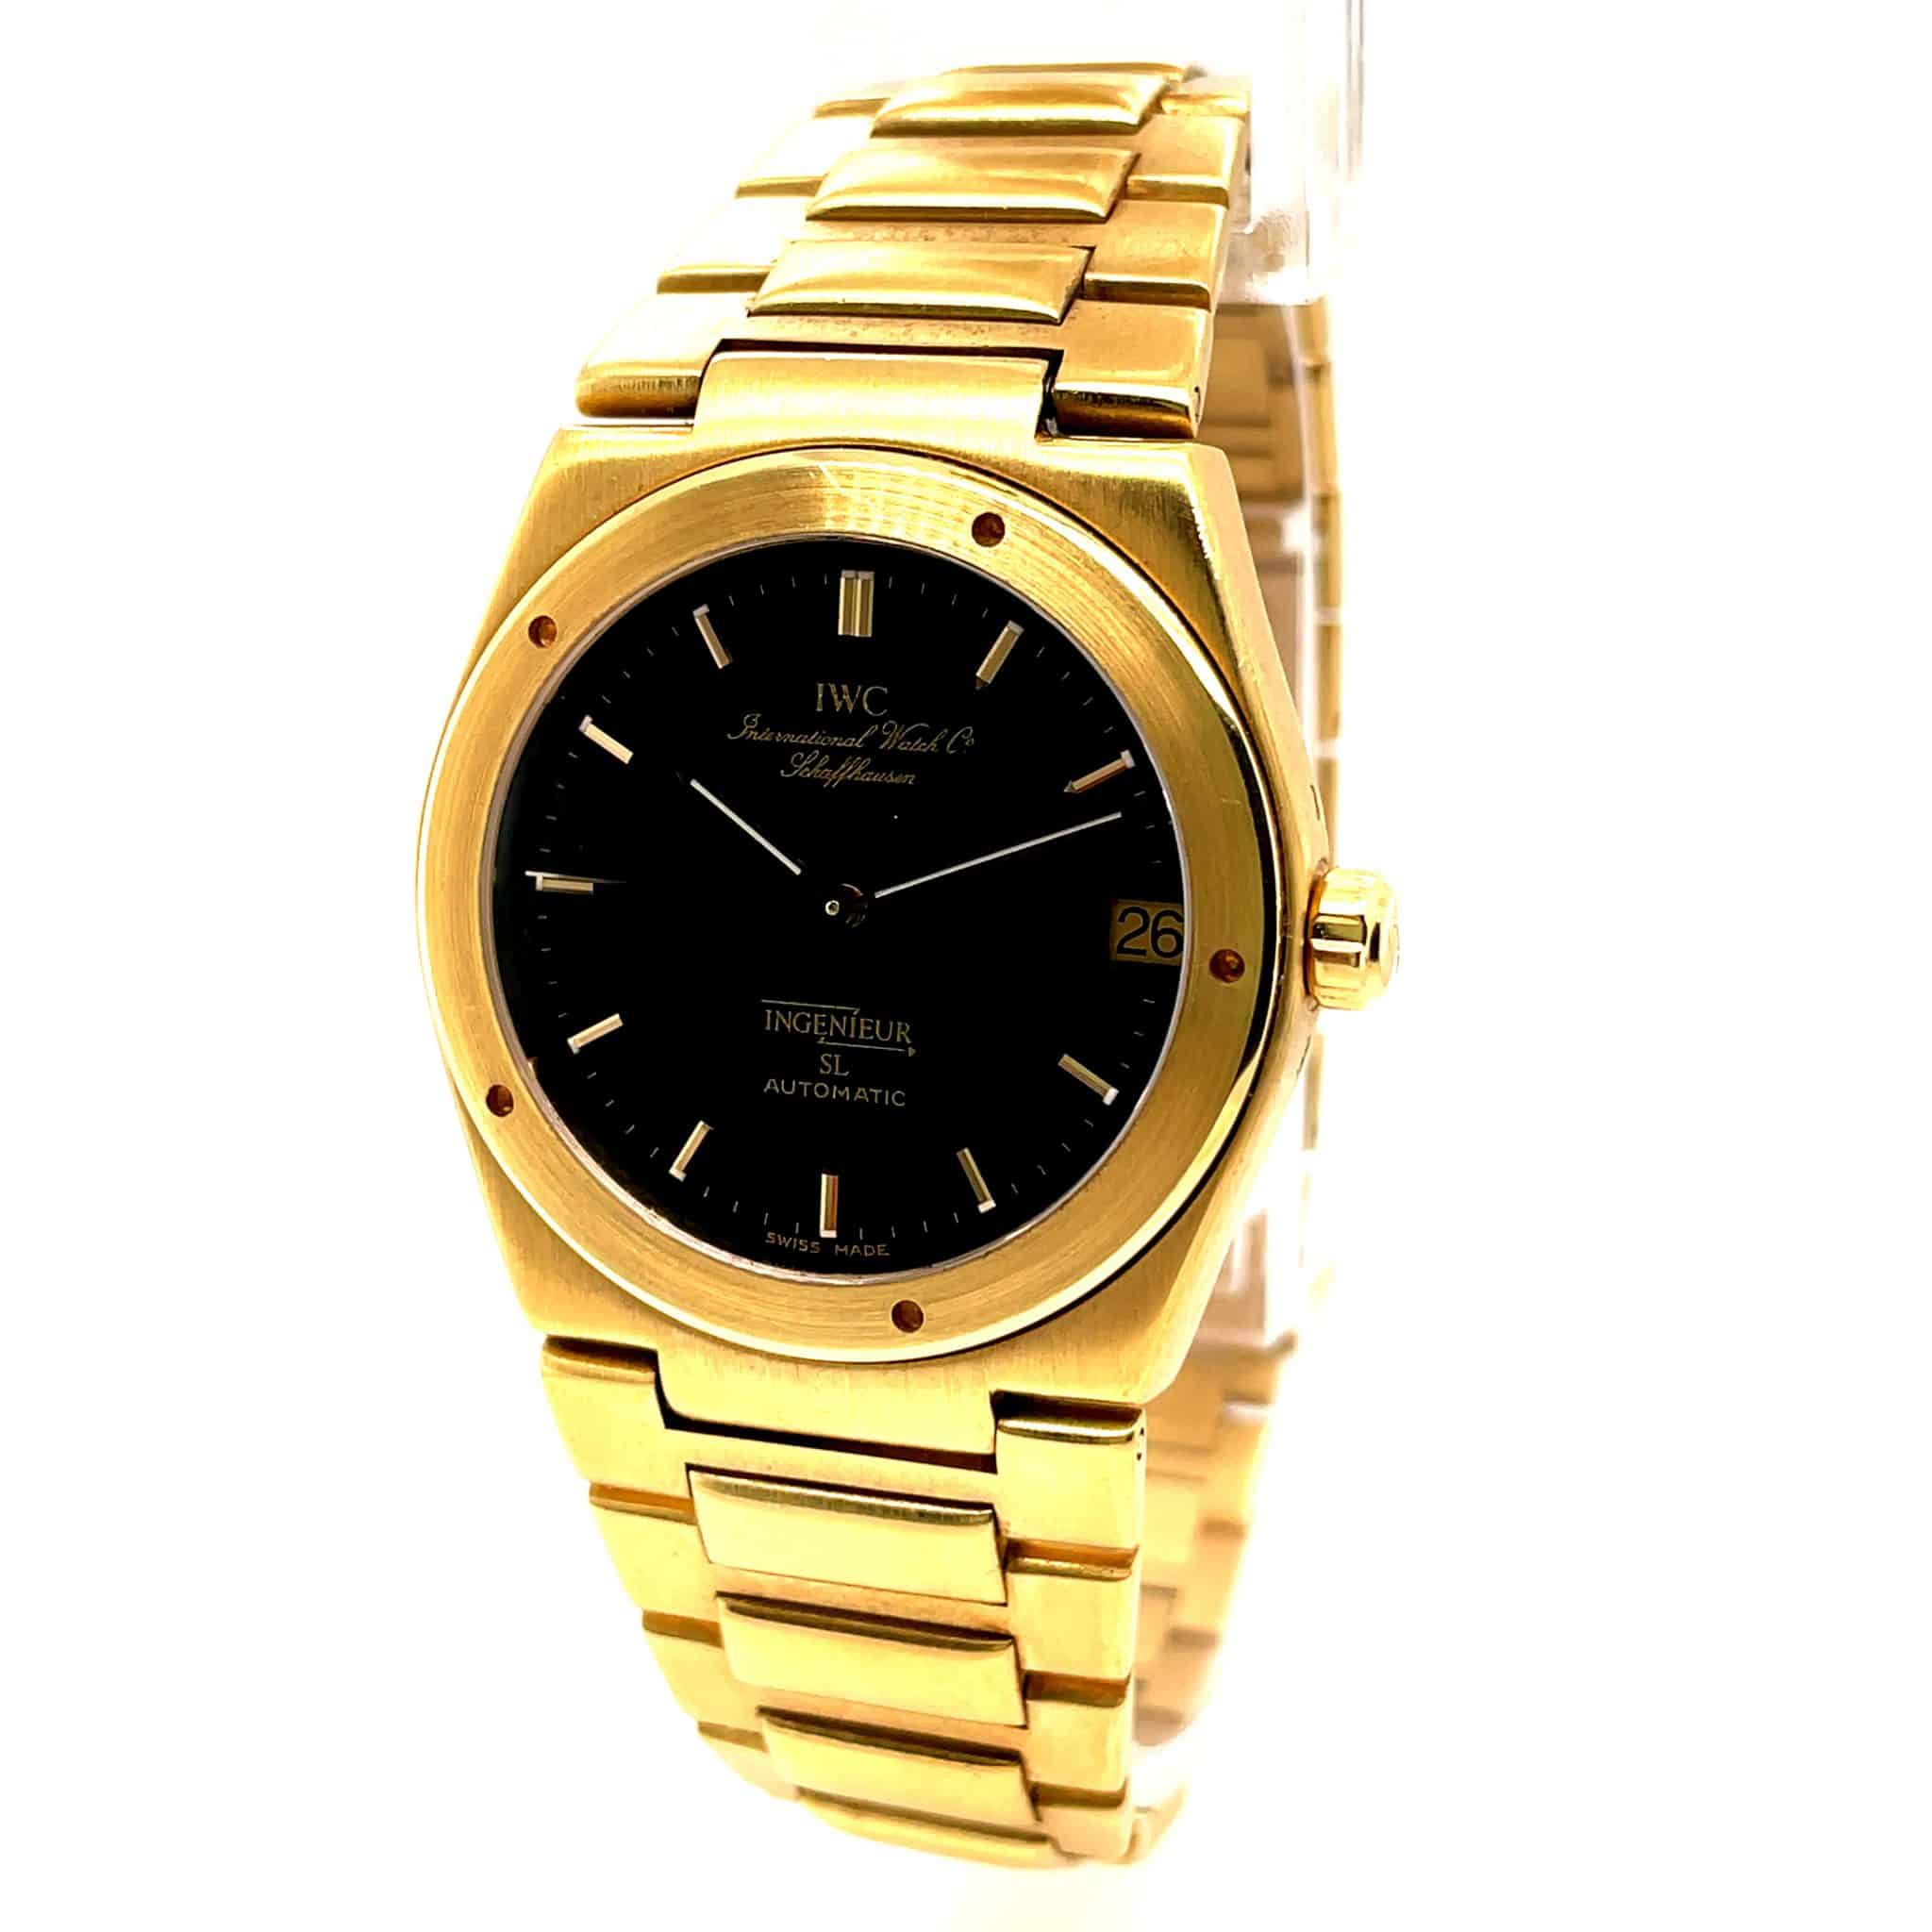 IWC Ingenieur SL automatic 34mm Ref. 9230 Vintage Full Gold 750 (18K) Black Dial 1990s